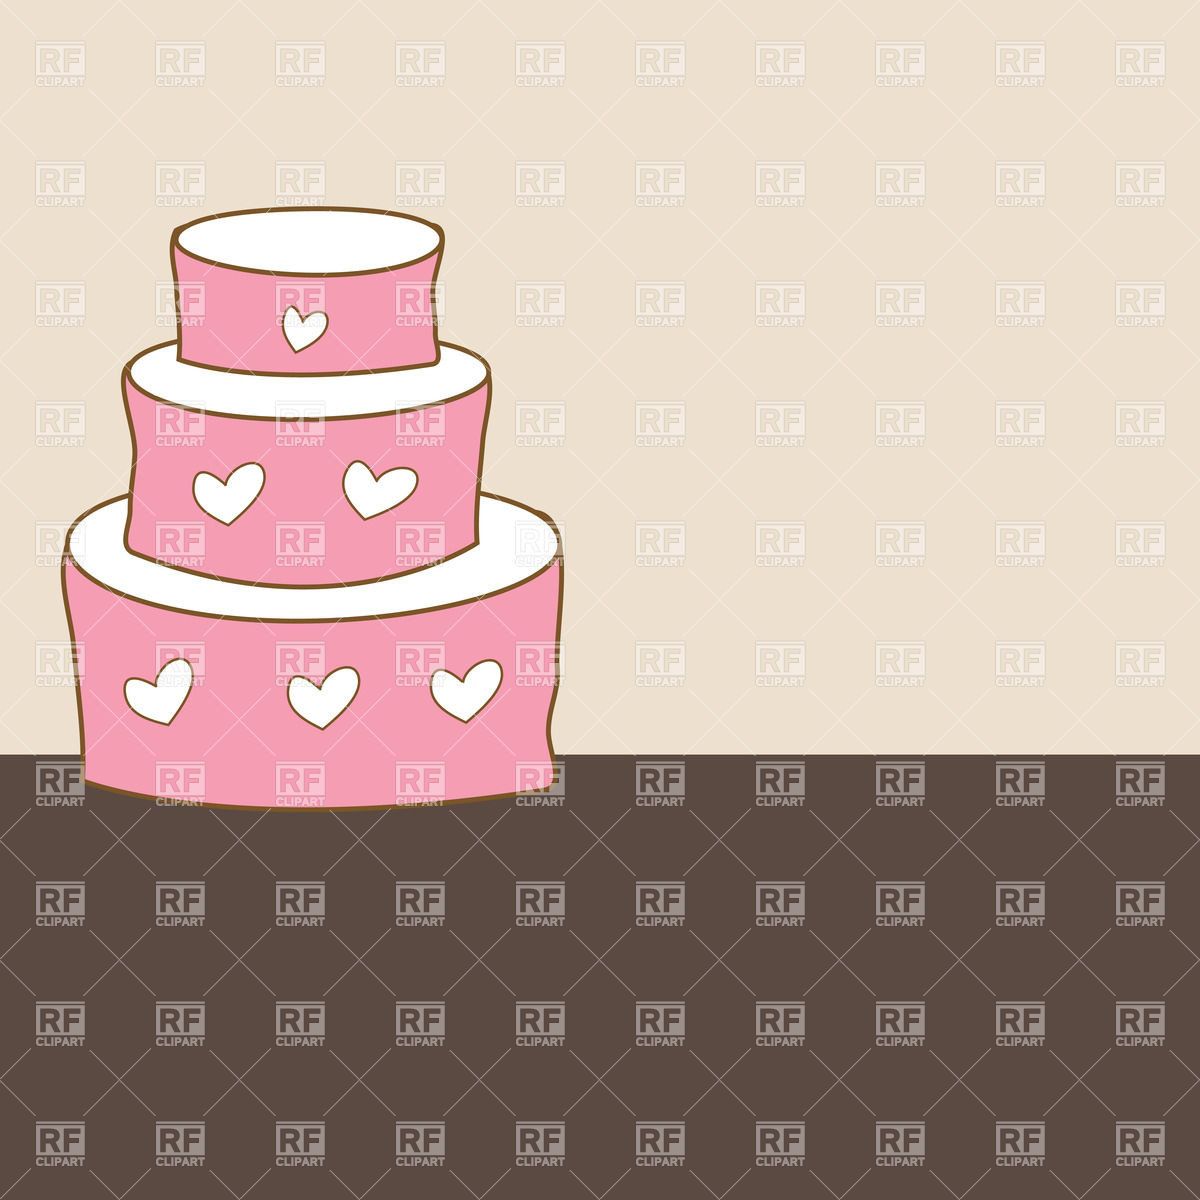     Pink Wedding Cake With Hearts Download Royalty Free Vector Clipart